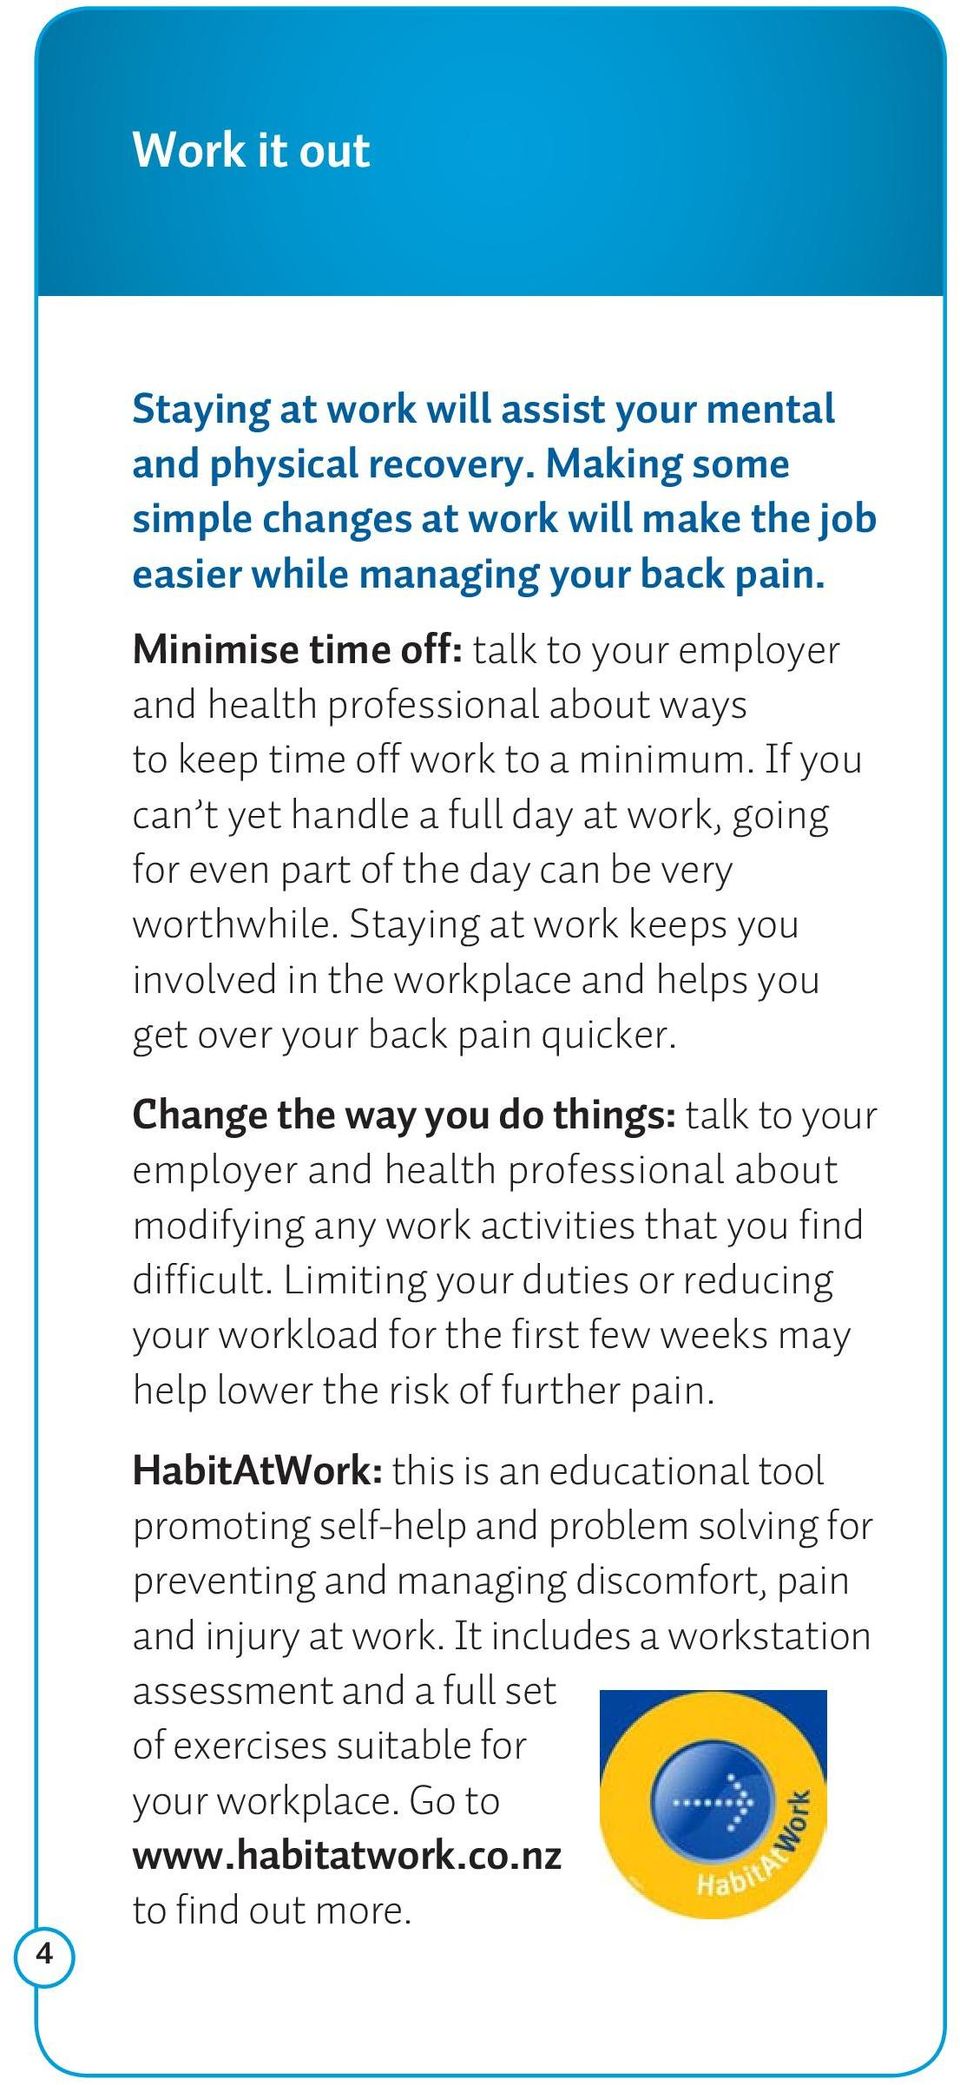 If you can t yet handle a full day at work, going for even part of the day can be very worthwhile. Staying at work keeps you involved in the workplace and helps you get over your back pain quicker.